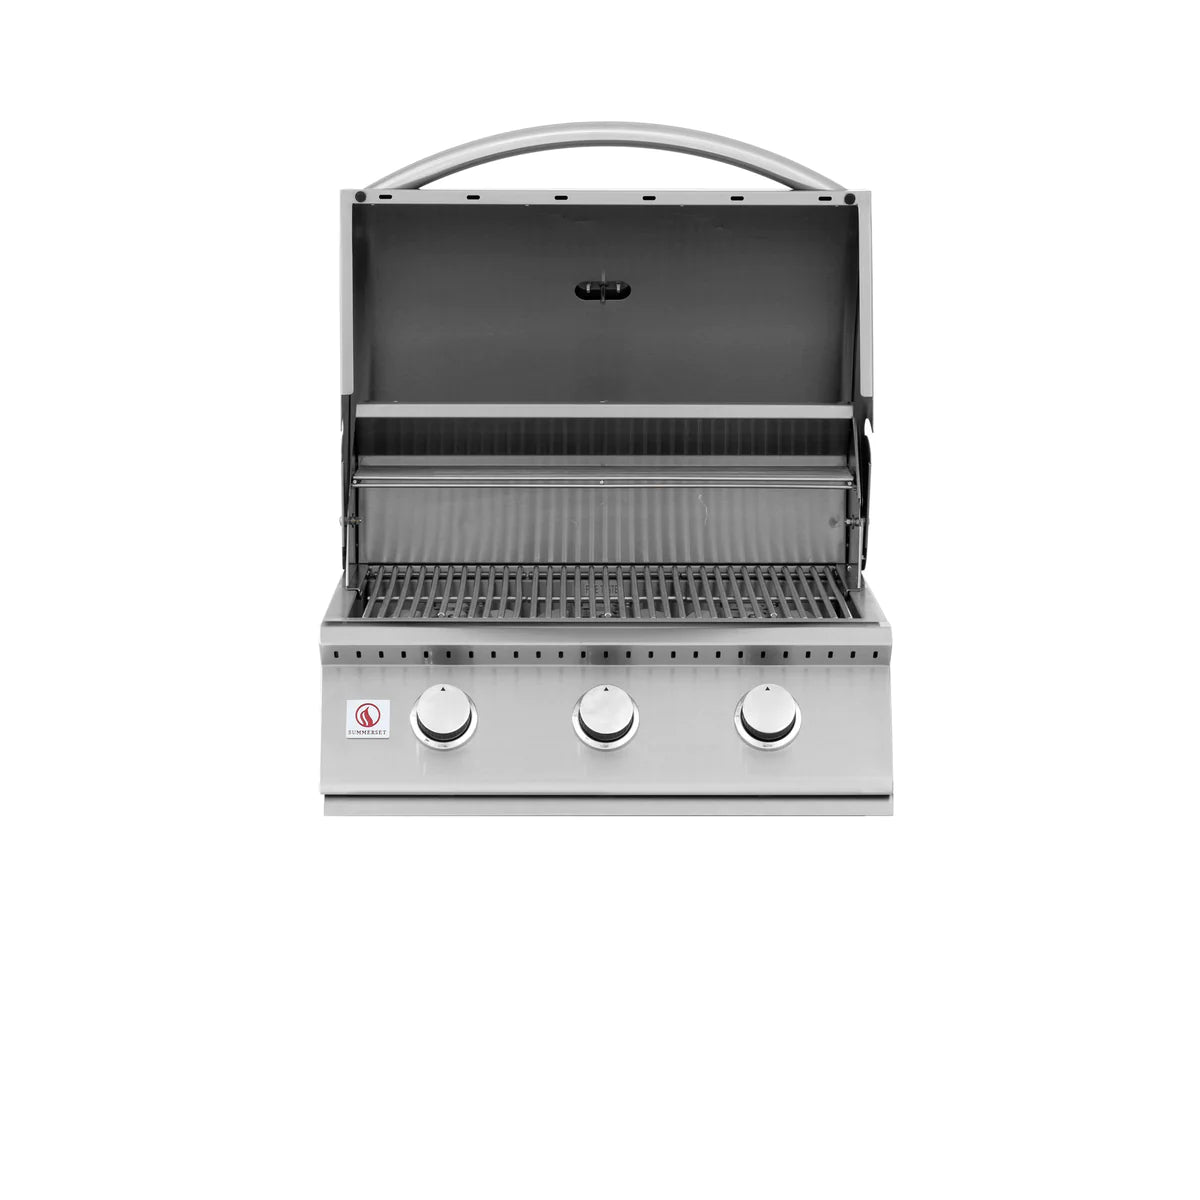 Sizzler 26" Built-in Grill